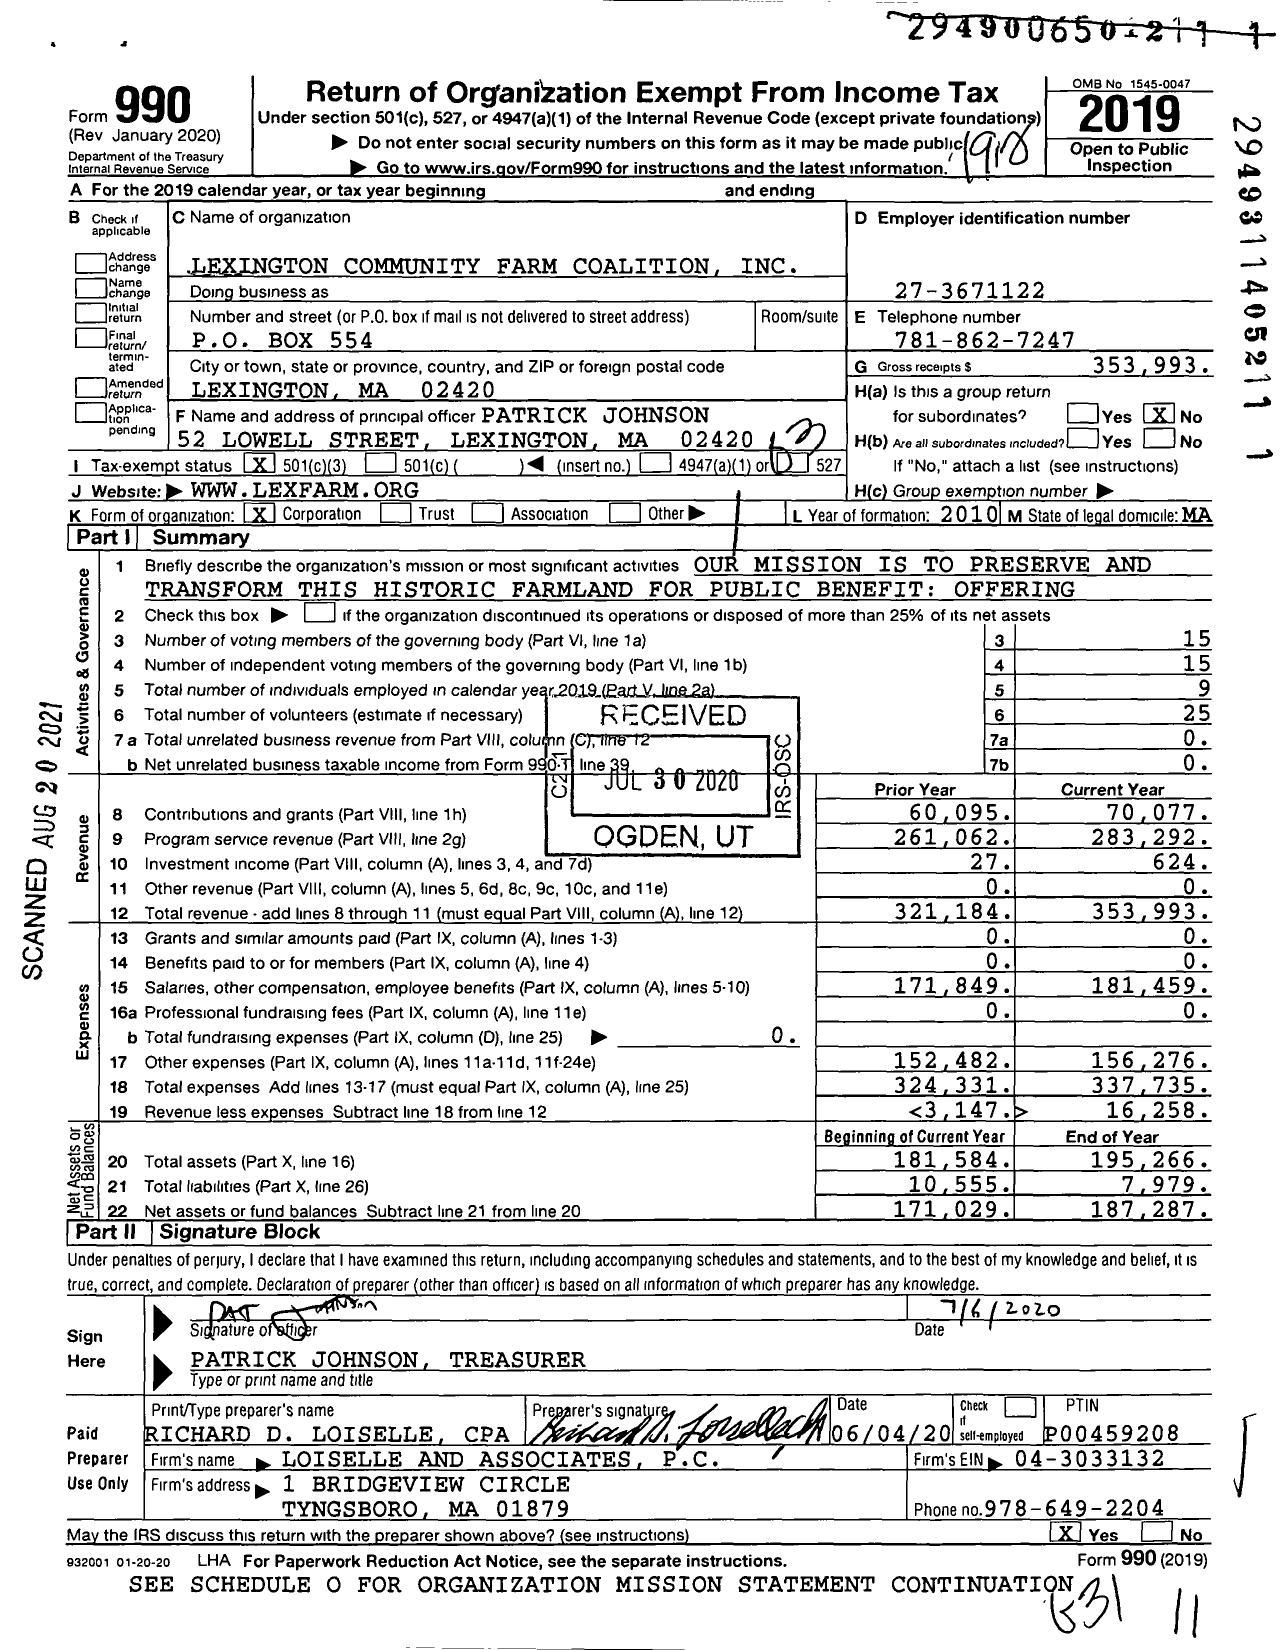 Image of first page of 2019 Form 990 for Lexington Community Farm Coalition